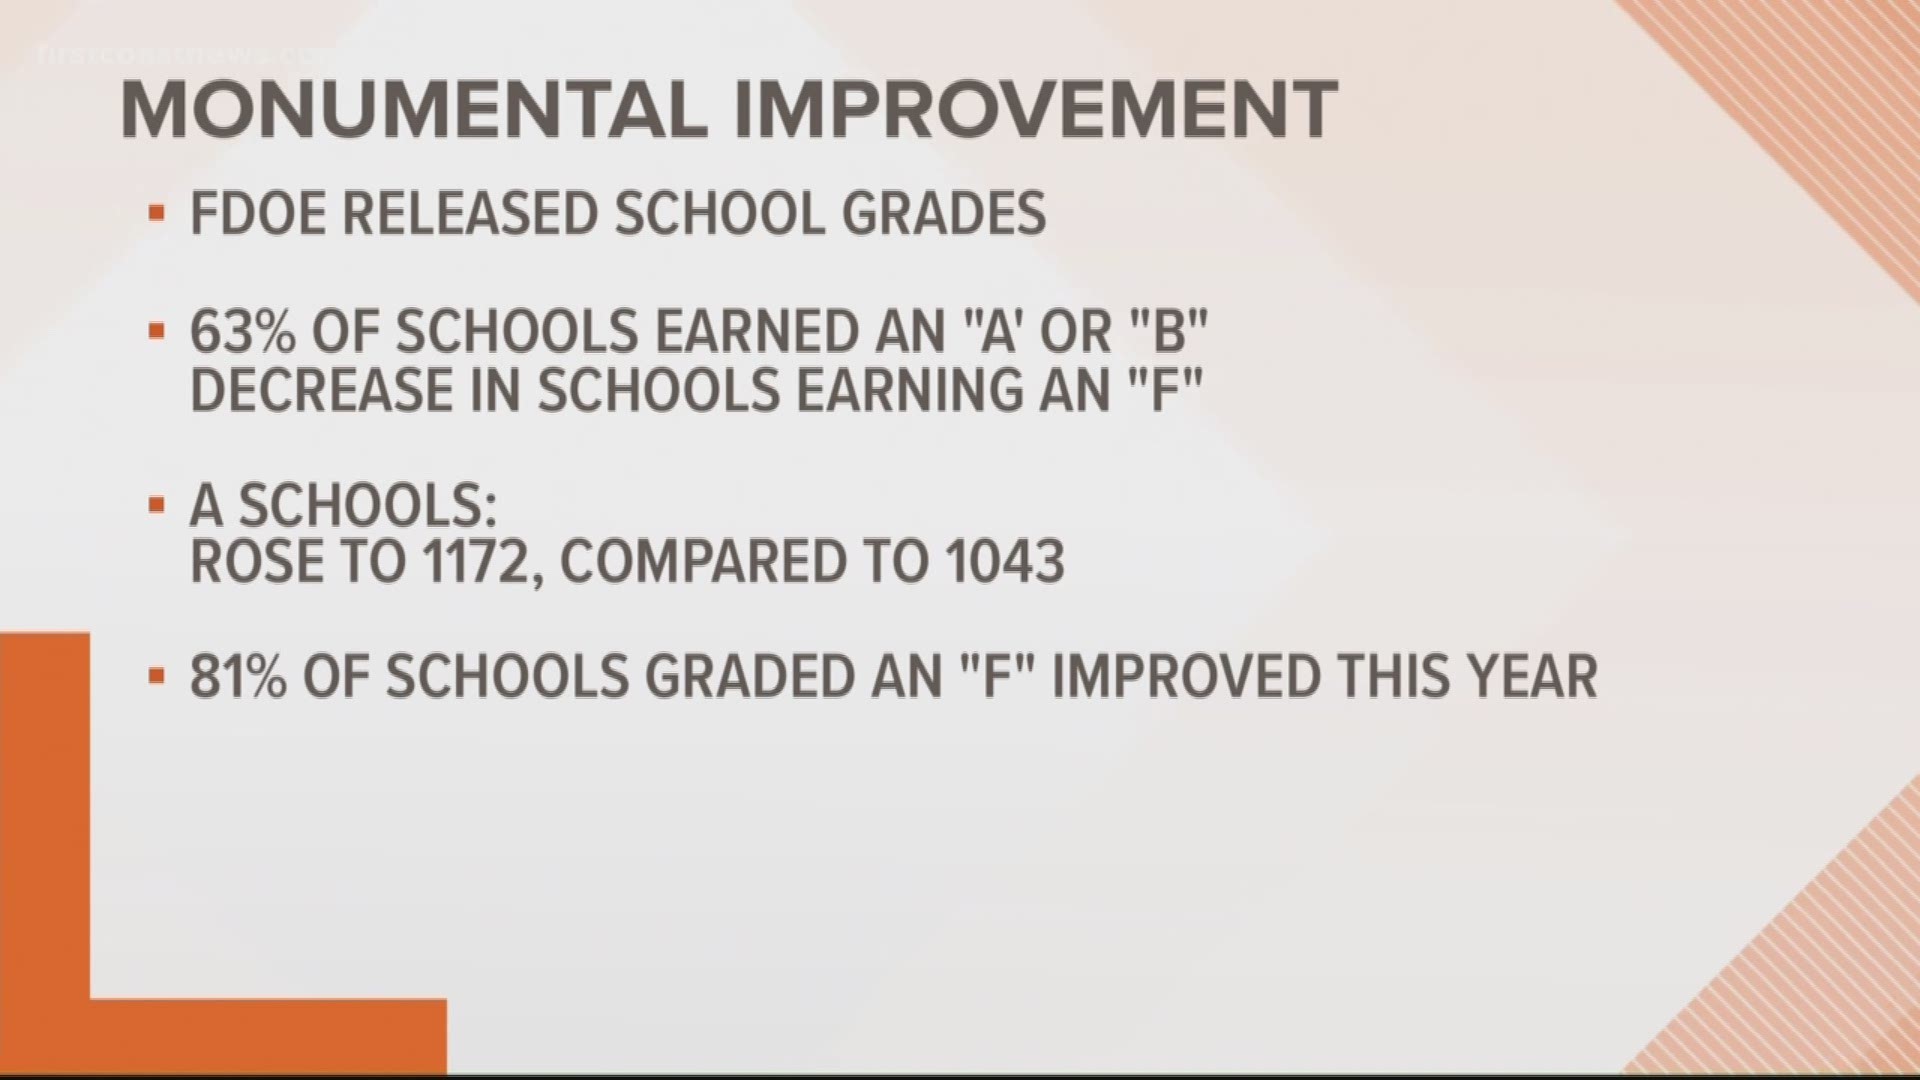 Over the past four years, schools in Bradford, Duval, Putnam and St. Johns have remained consistent in their grades.